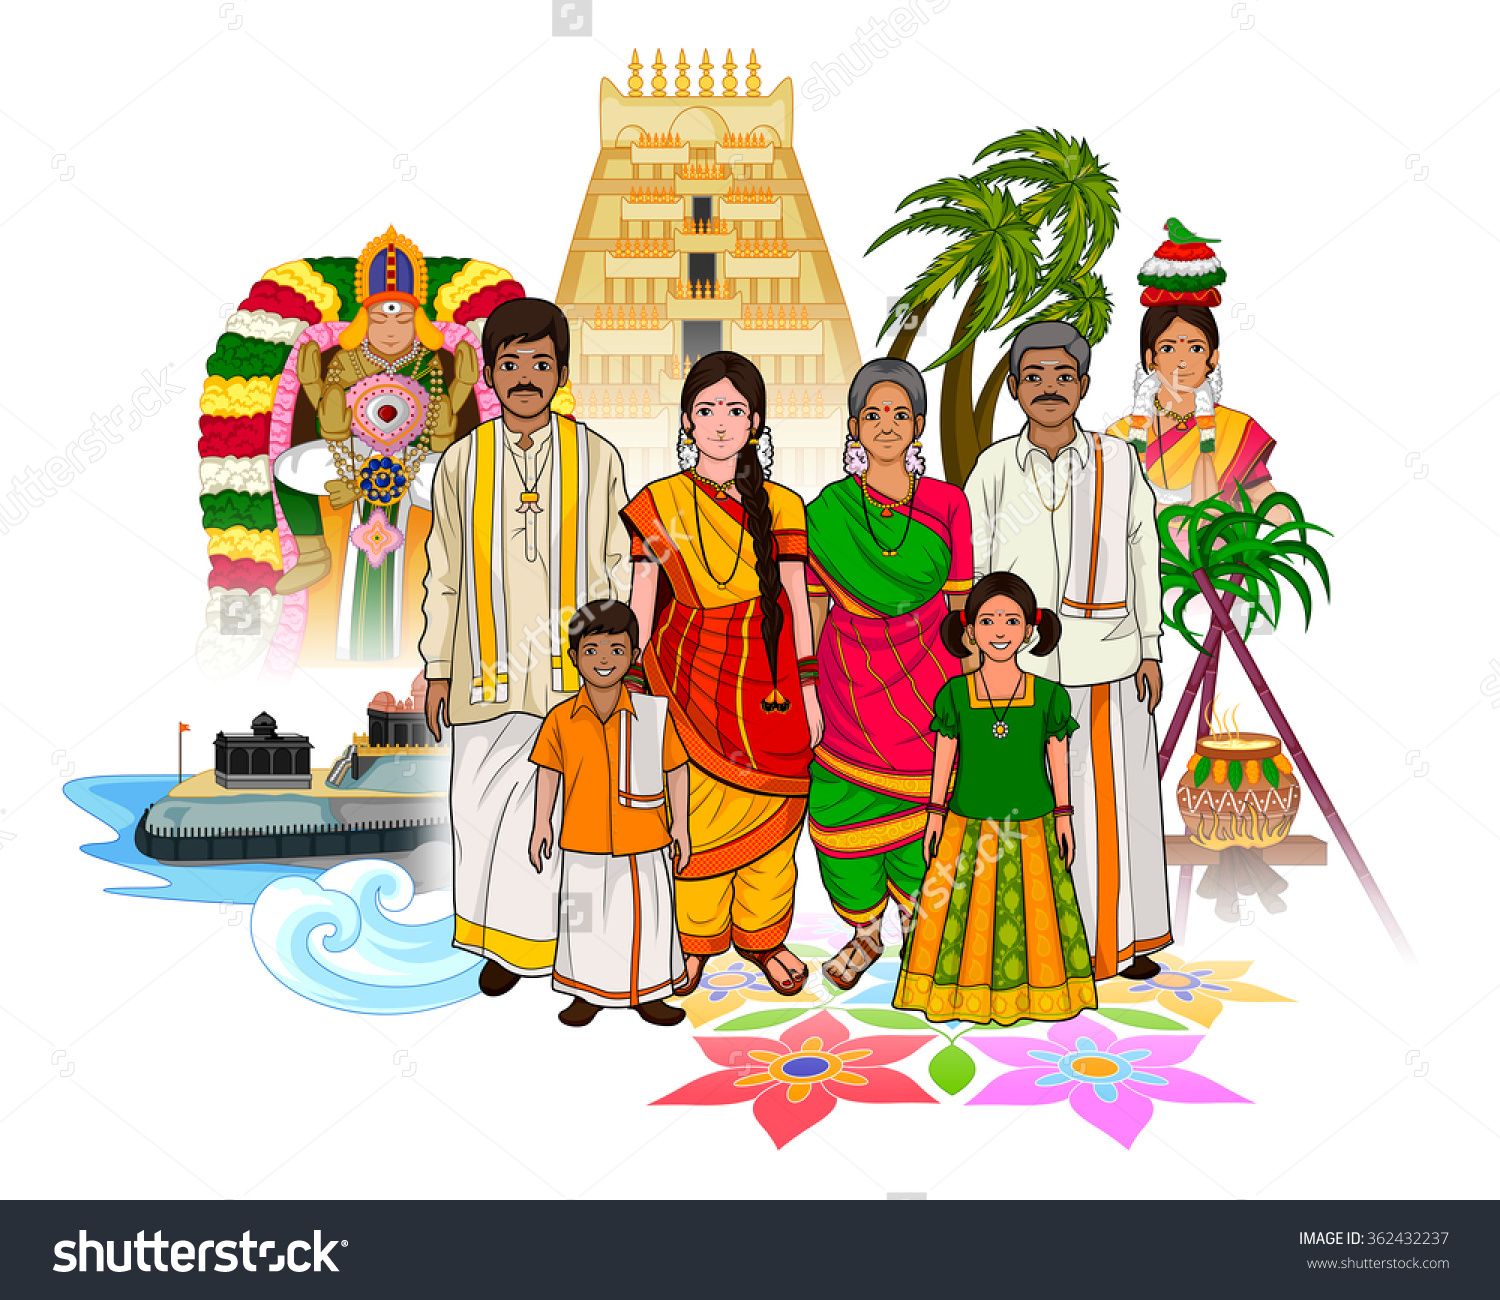 culture clipart share